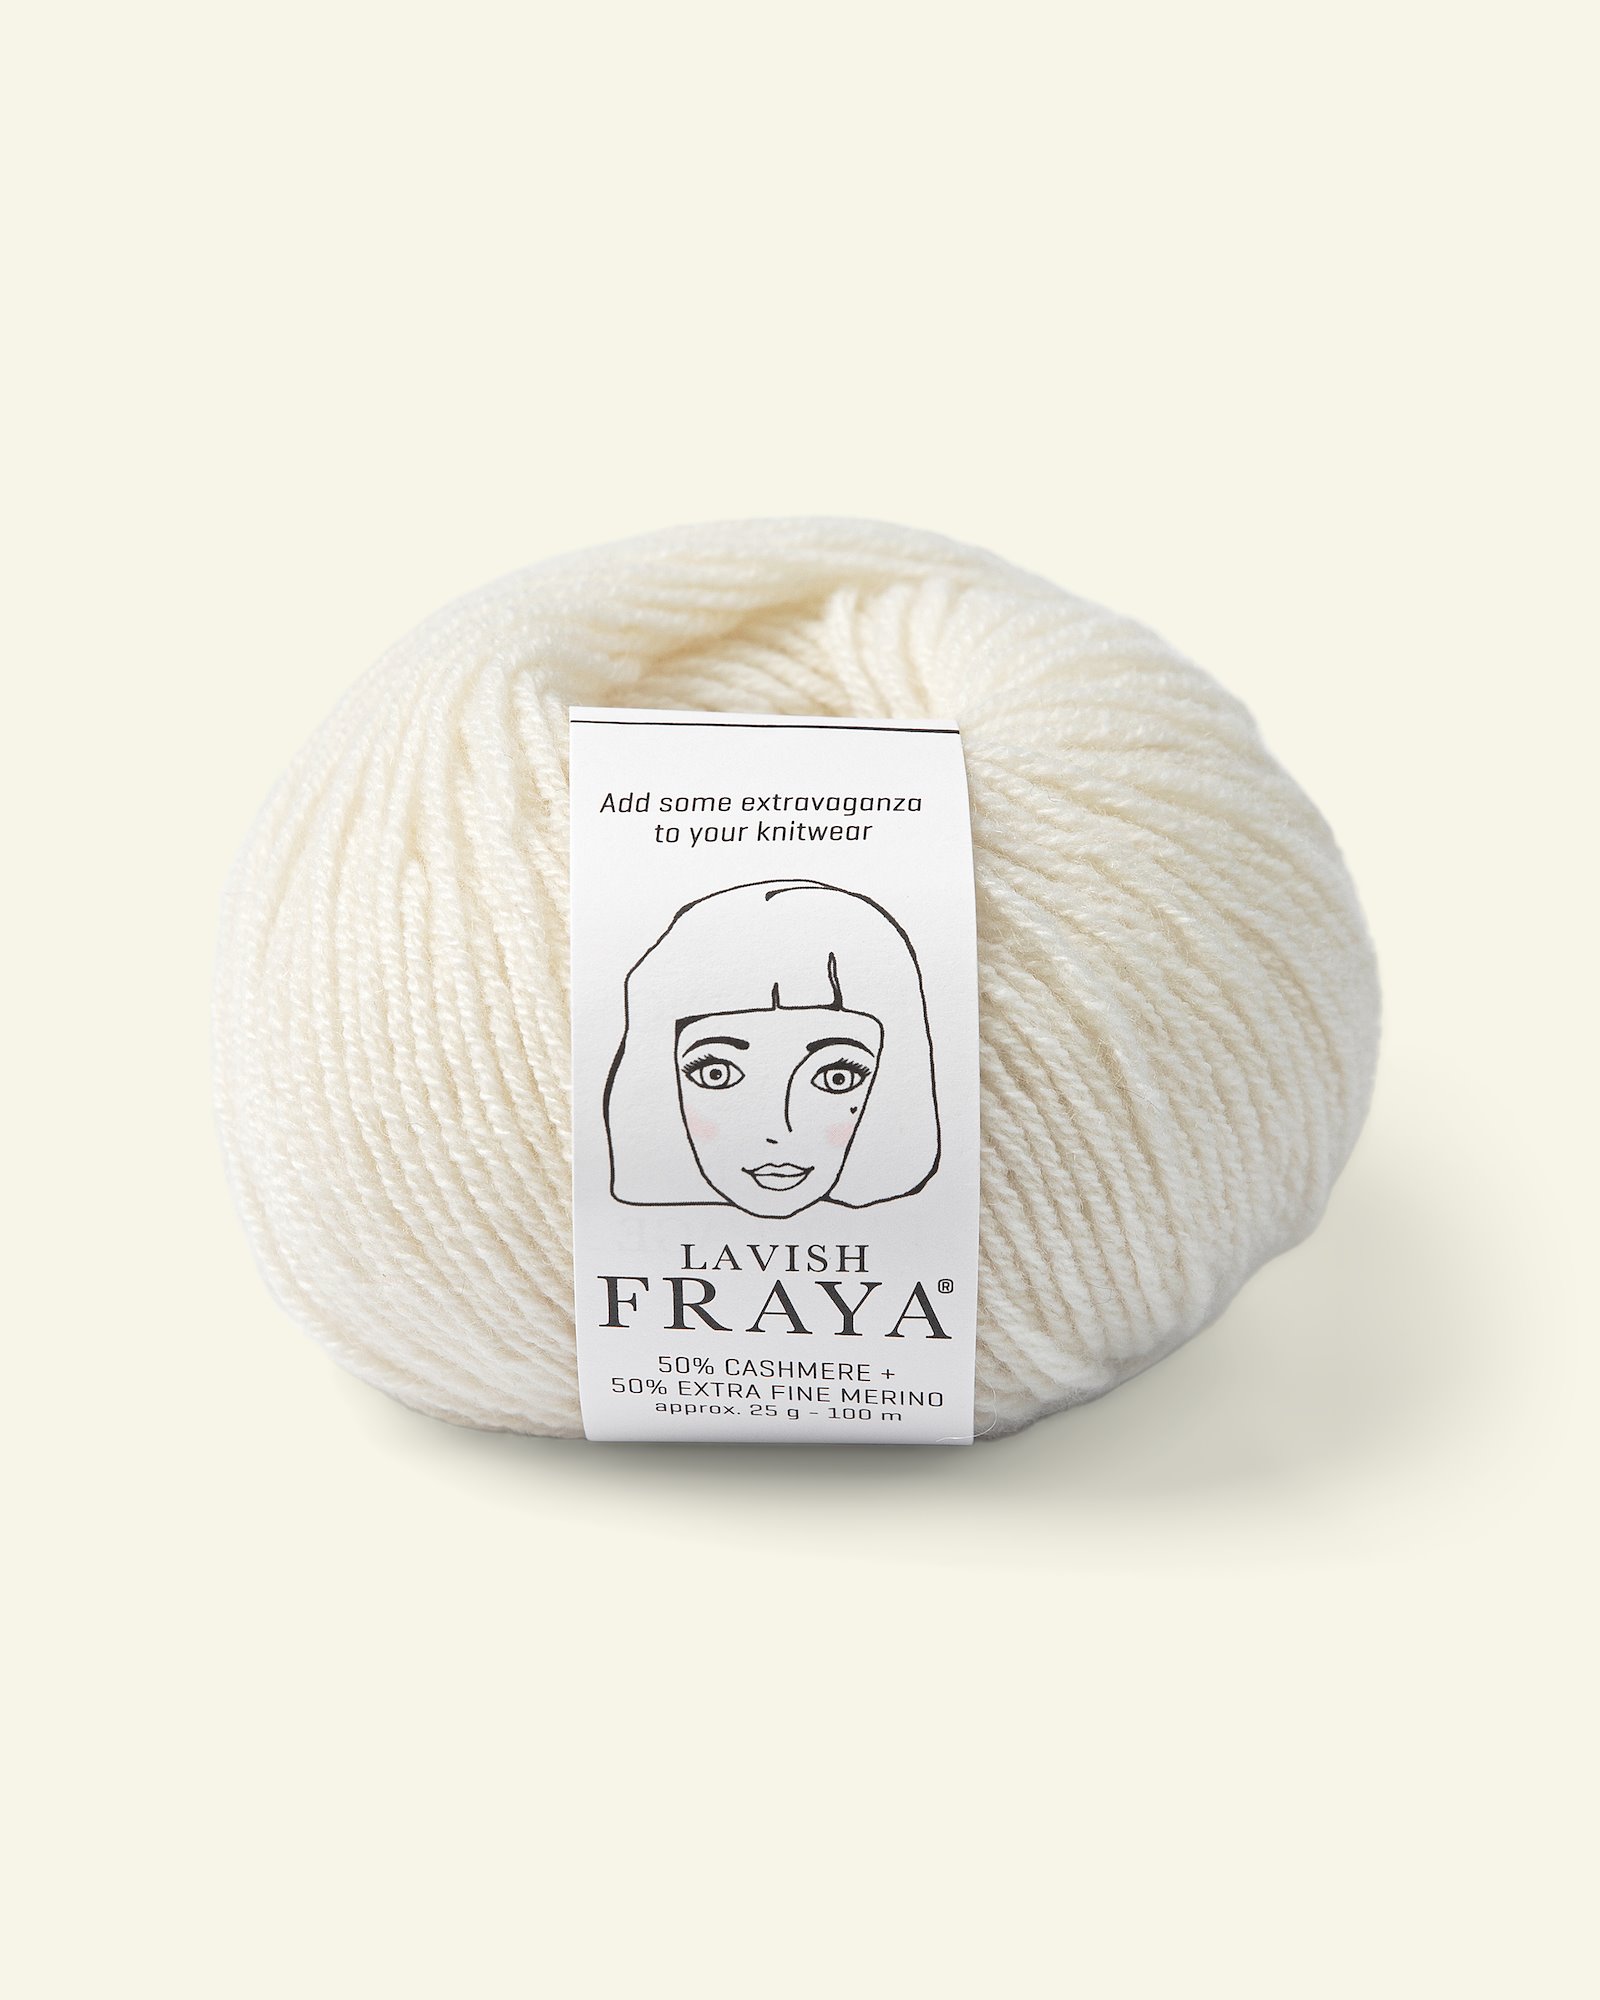 Buy Cashmere yarn for knitting and crochet